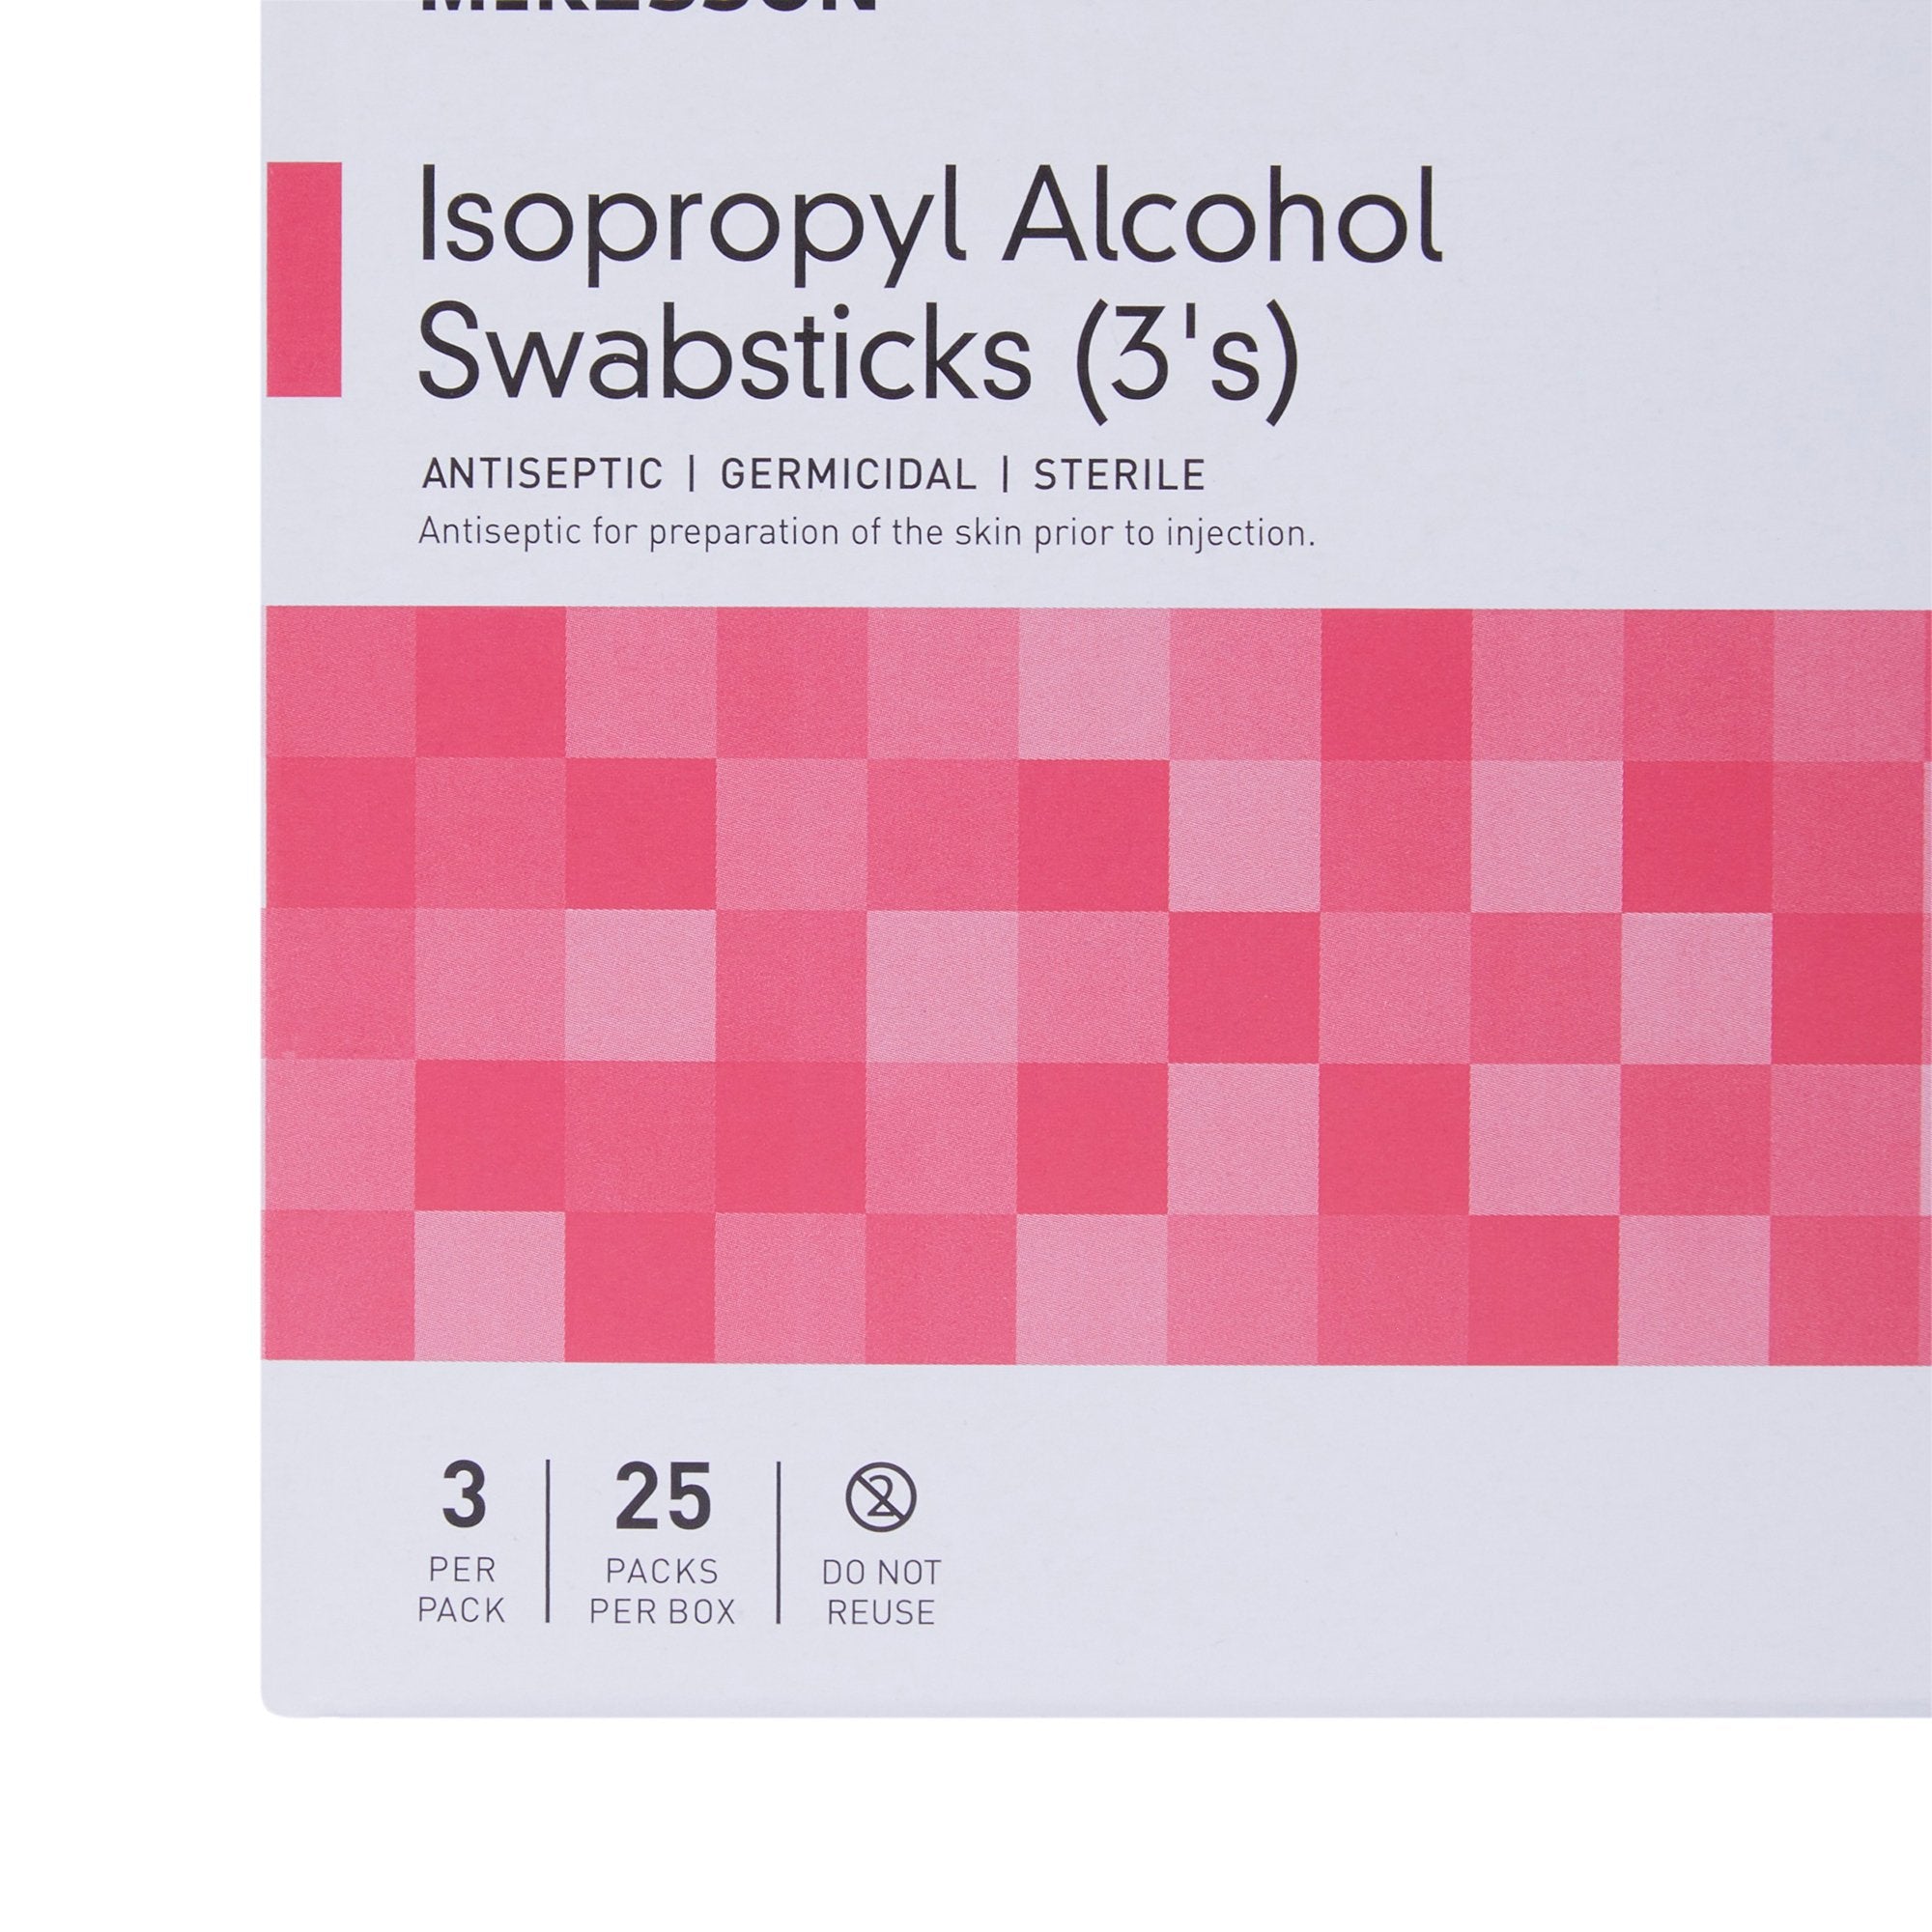 Impregnated Swabstick McKesson 70% Strength Isopropyl Alcohol Individual Packet Sterile